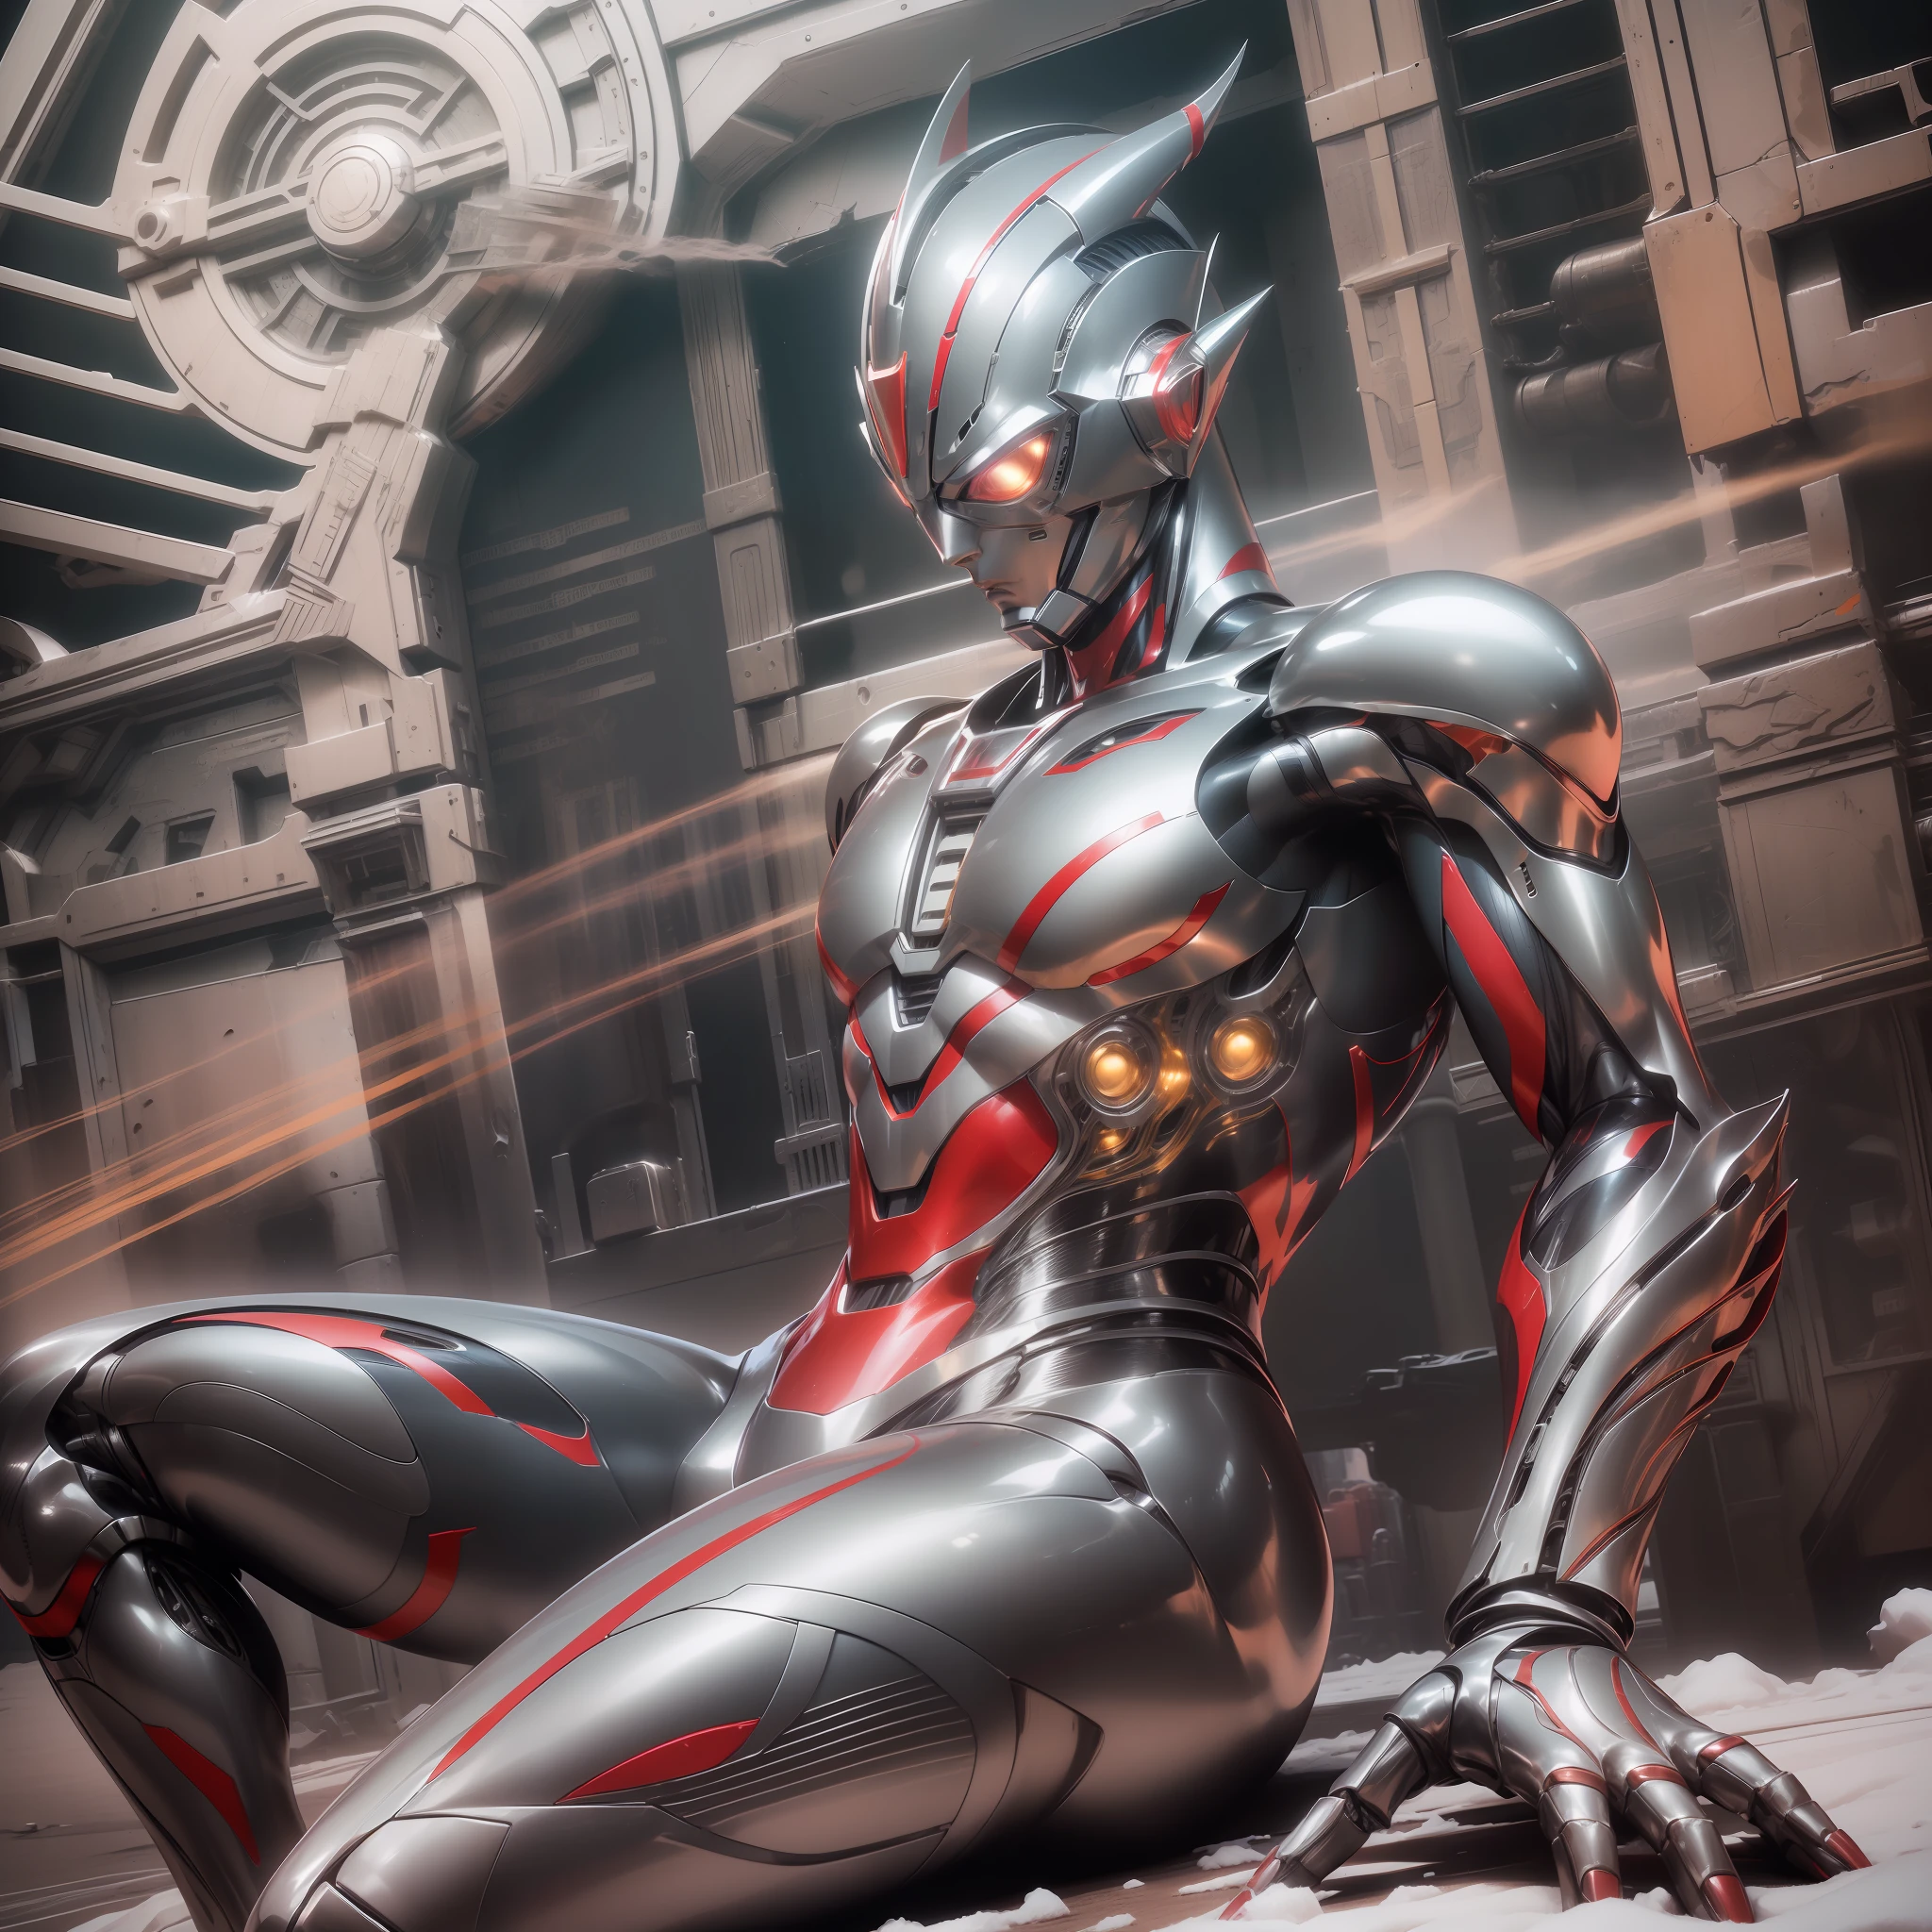 (masterpiece, super-delicate, high resolution), male focus, (((Mobile Ultraman))), (((Mecha))), (his head is tapered, his body is made of red and silver, his arms are mechanized, his body presents a strong mechanical feeling, there are obvious dividing lines between the parts, making the whole look very complex, the overall shape is complex and mechanized), (((Straddle posture))), pose for photos, high angle, dark night, city ruins, Background details, (((whole body))), ((((sense of greatness))), (((solo)))